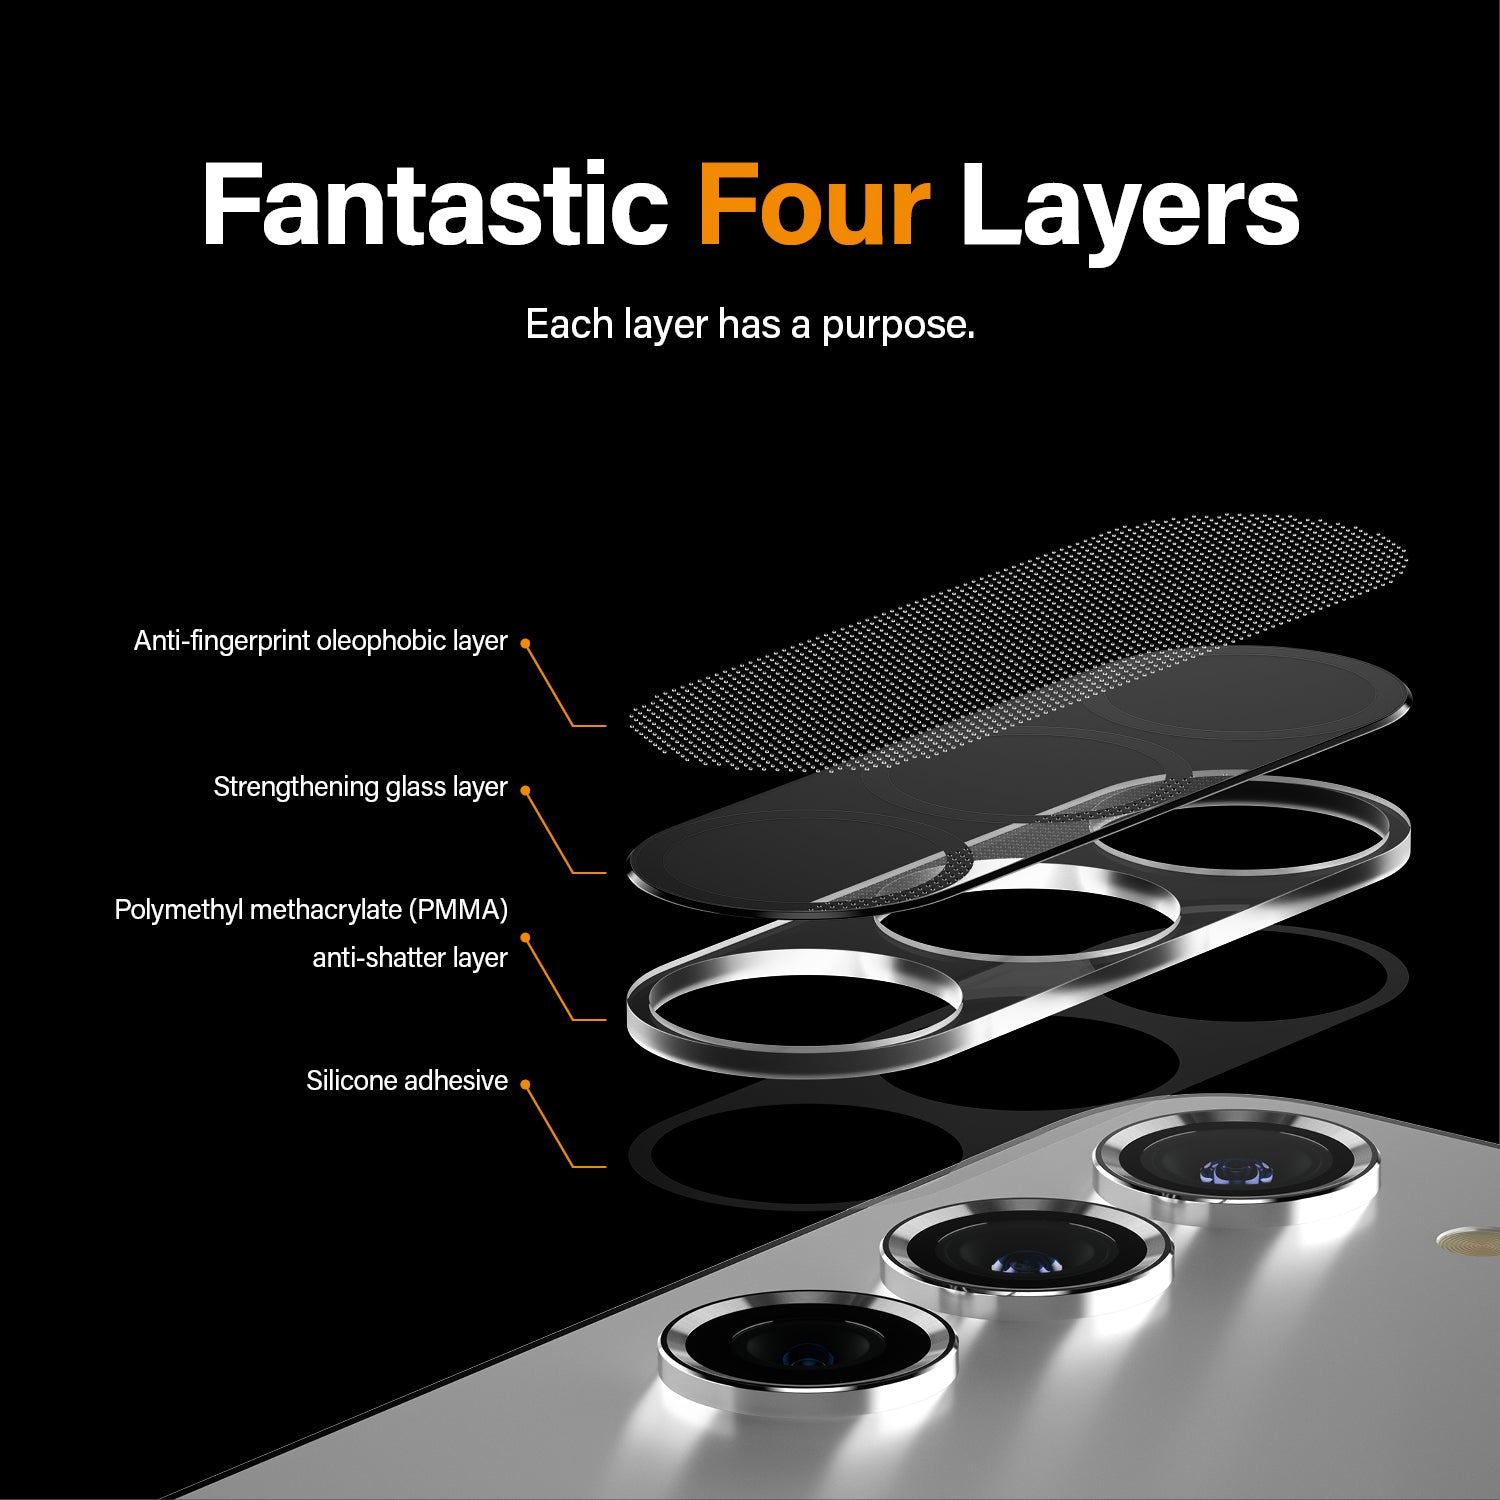 PanzerGlass™ PicturePerfect Camera Lens Protector for Samsung Galaxy S23 and S23+.